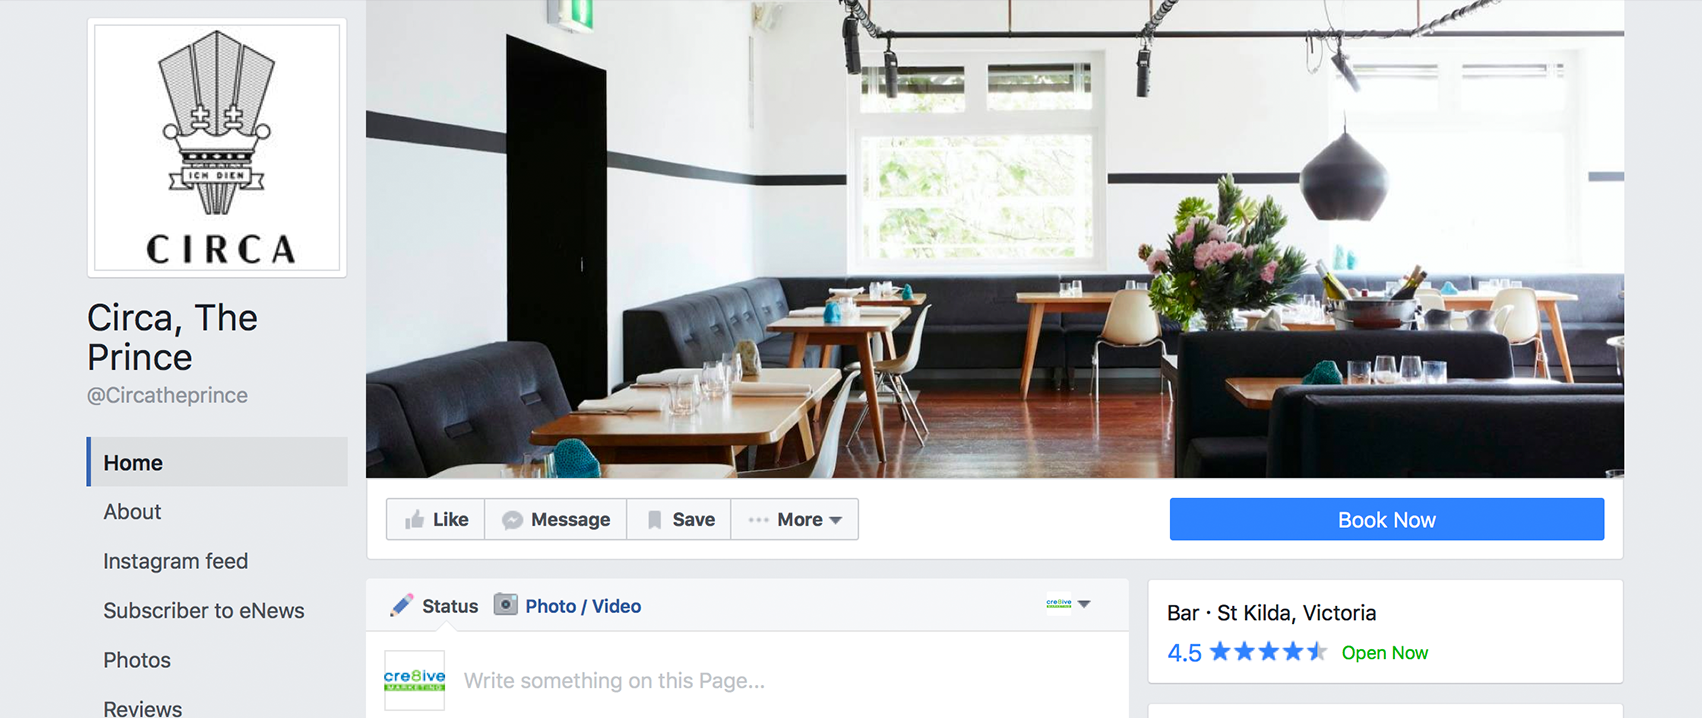 Facebook's new Page layout